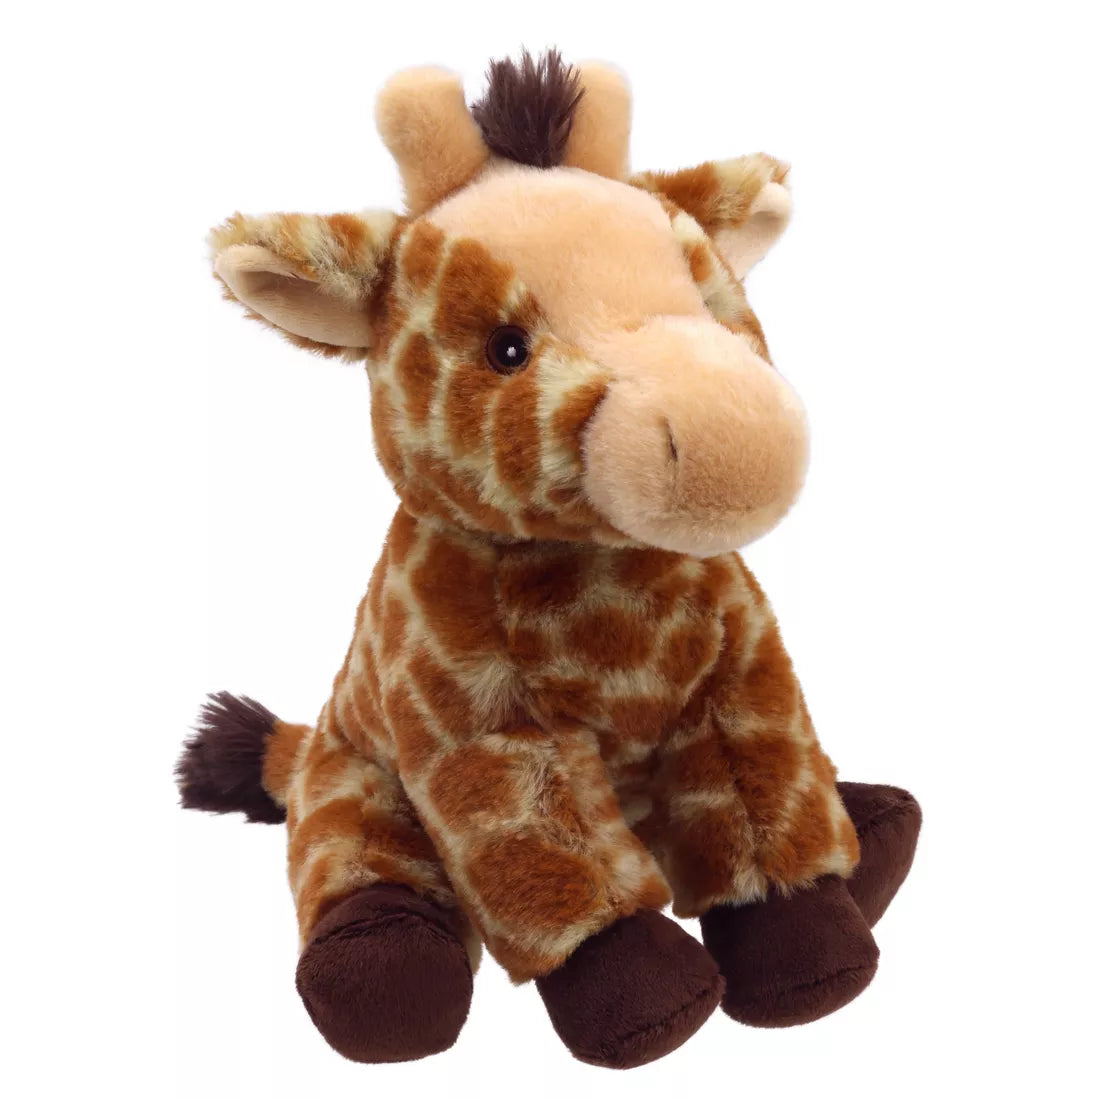 Wilberry Eco Cuddly George the Giraffe Soft Toy.